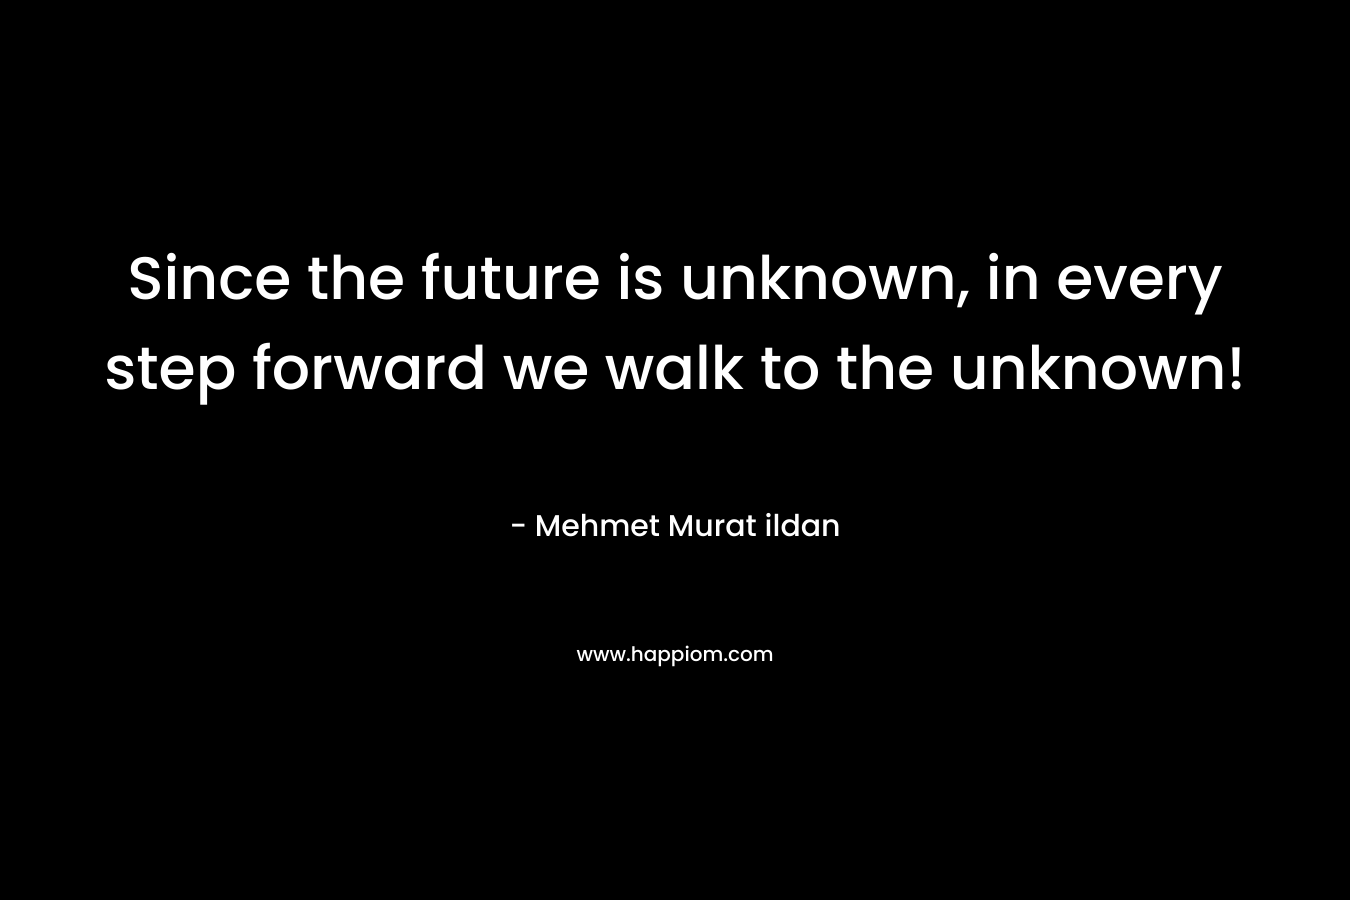 Since the future is unknown, in every step forward we walk to the unknown!